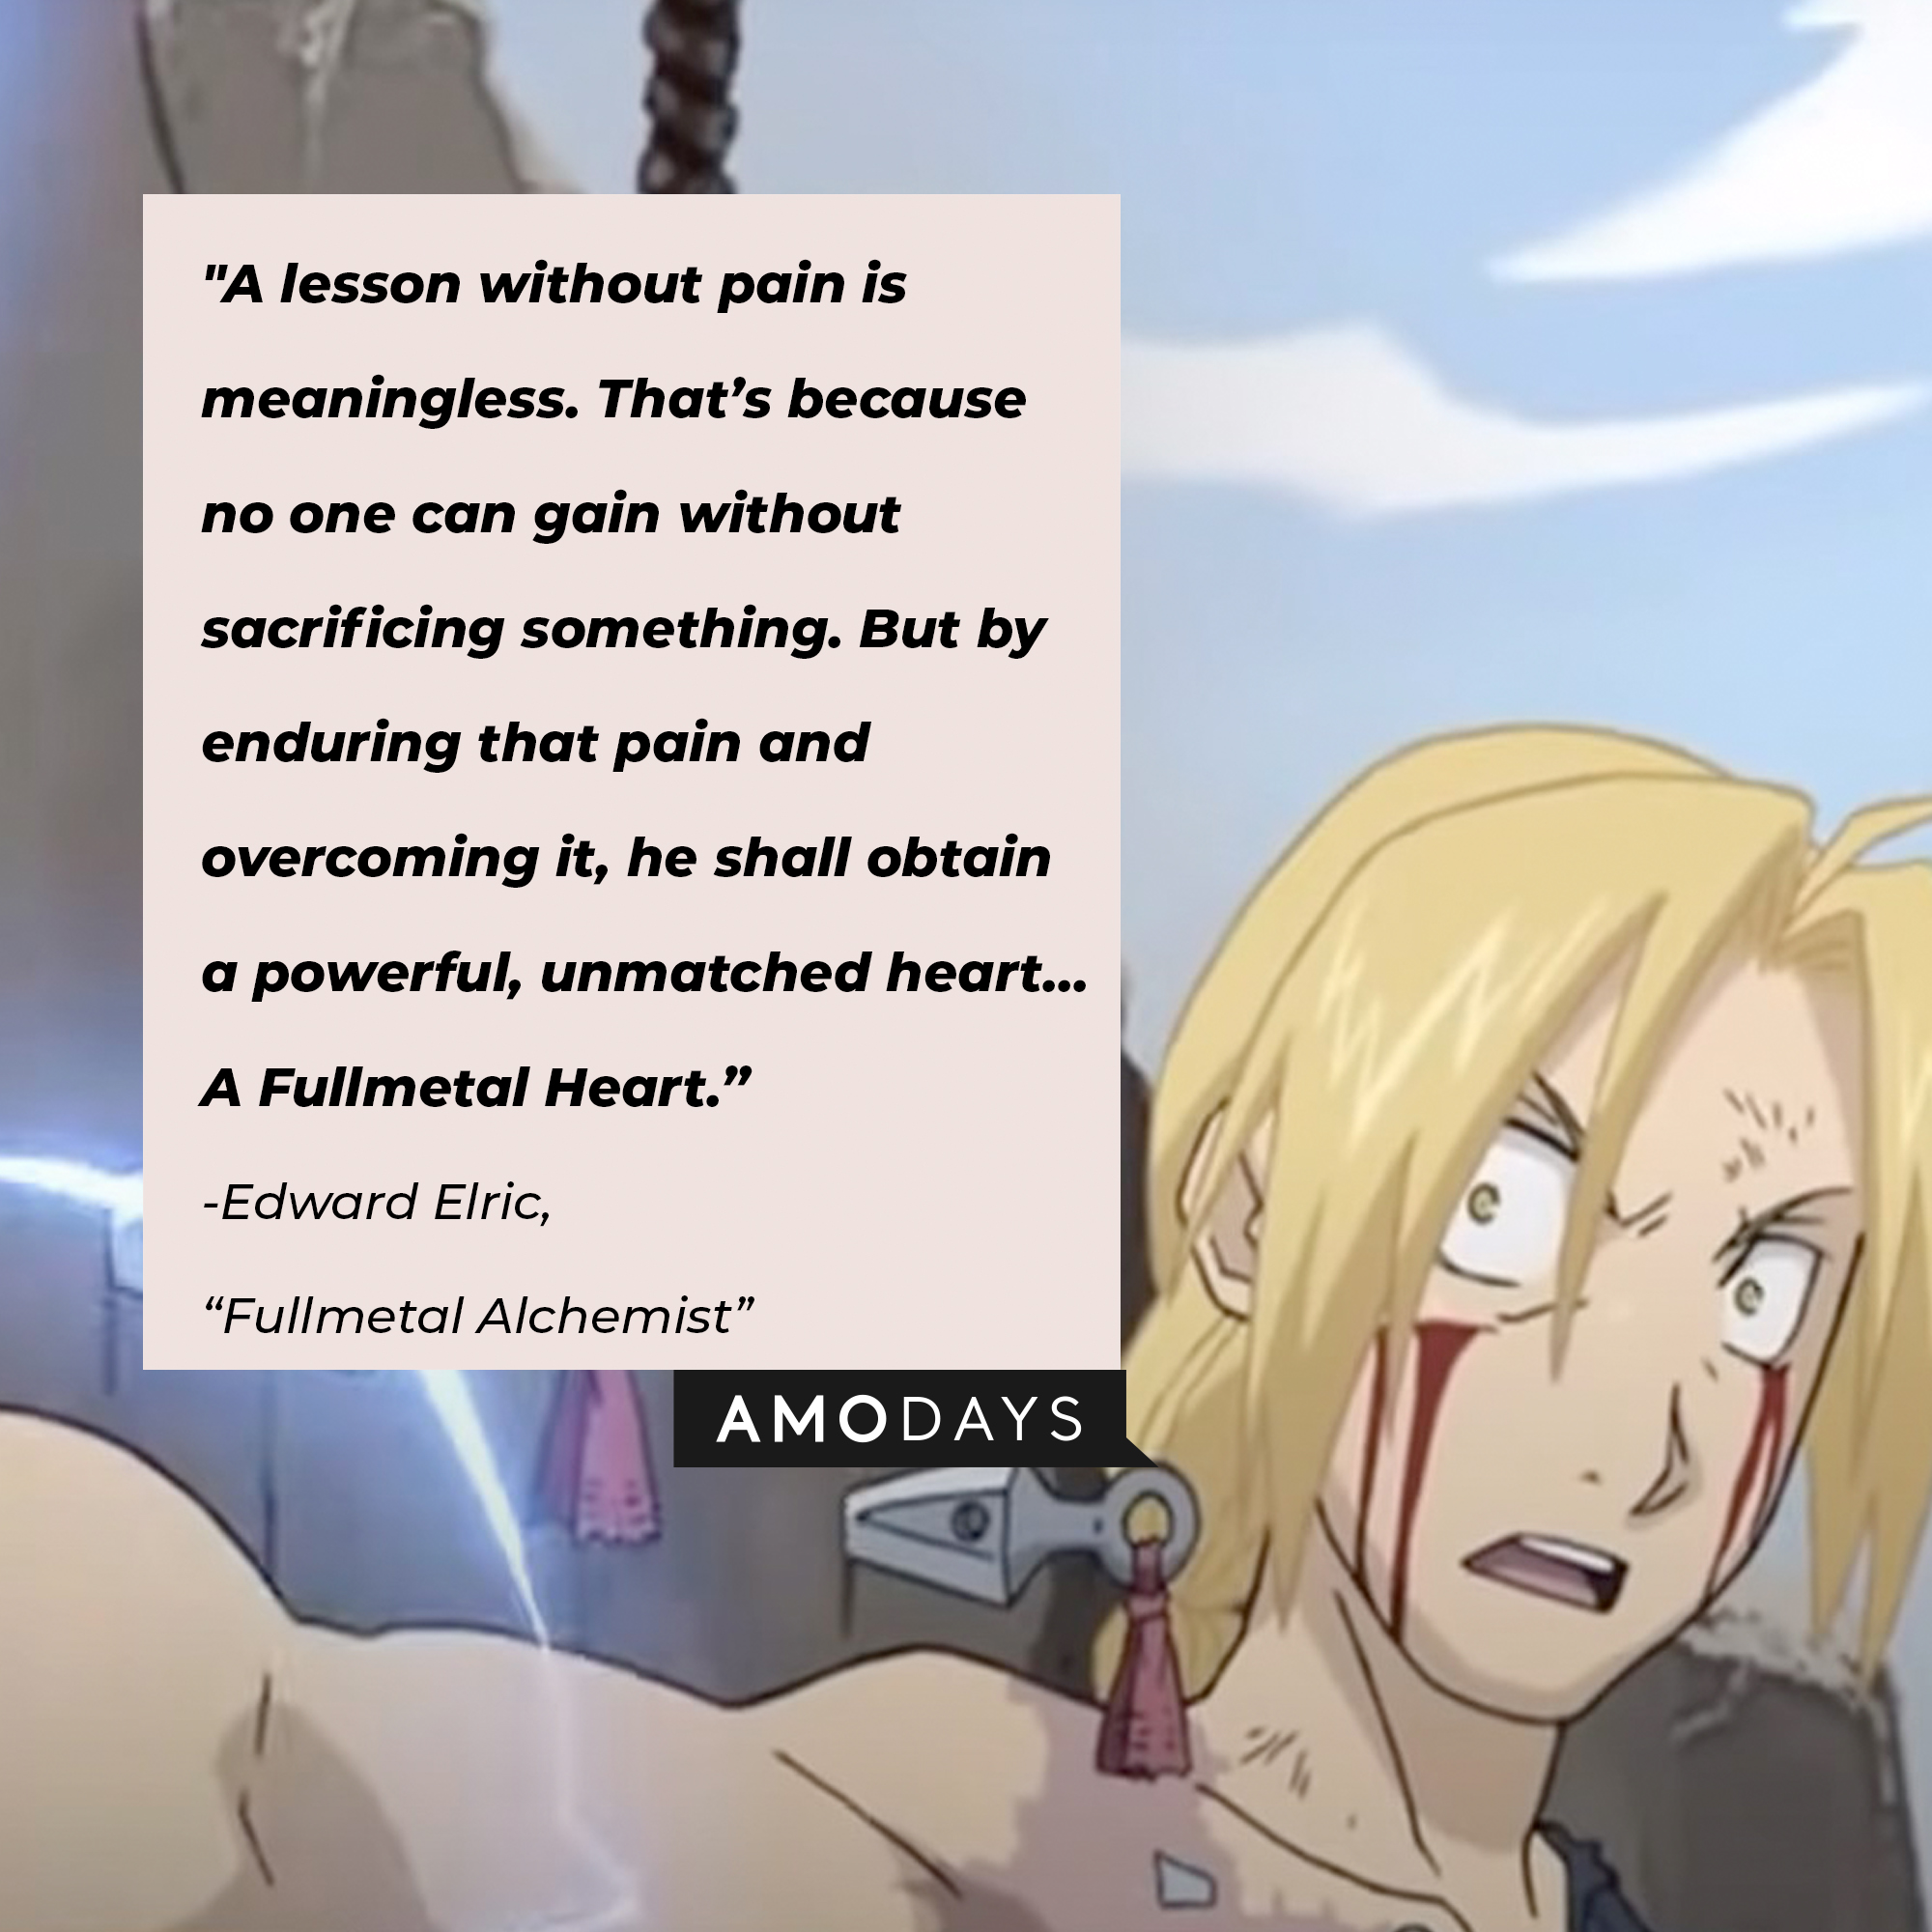 Edward Elric's quote: "A lesson without pain is meaningless. That’s because no one can gain without sacrificing something. But by enduring that pain and overcoming it, he shall obtain a powerful, unmatched heart… A Fullmetal Heart.” | Image: facebook.com/FMAHiromuArakawa